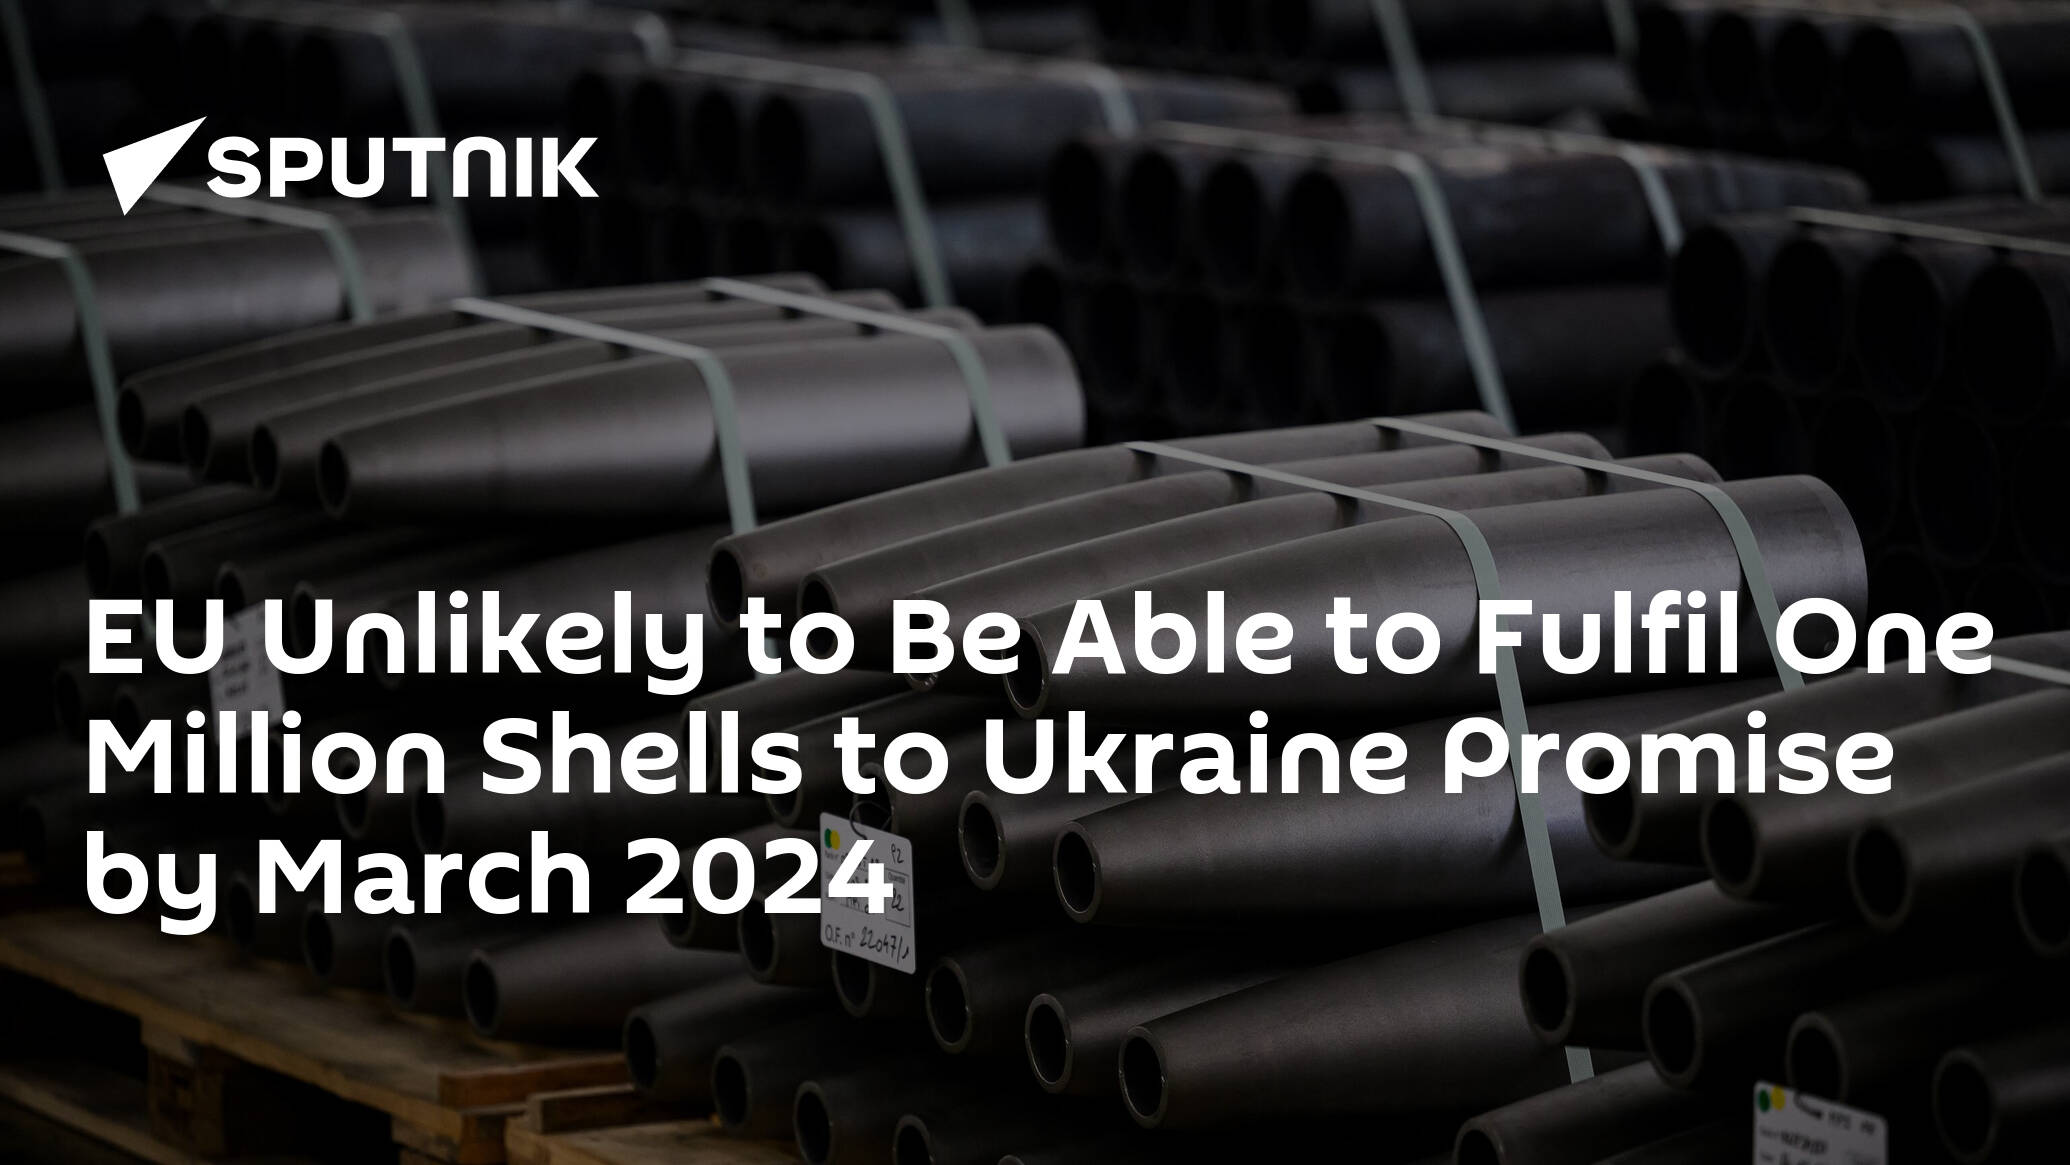 EU Unlikely to Be Able to Fulfil One Million Shells to Ukraine Promise by March 2024